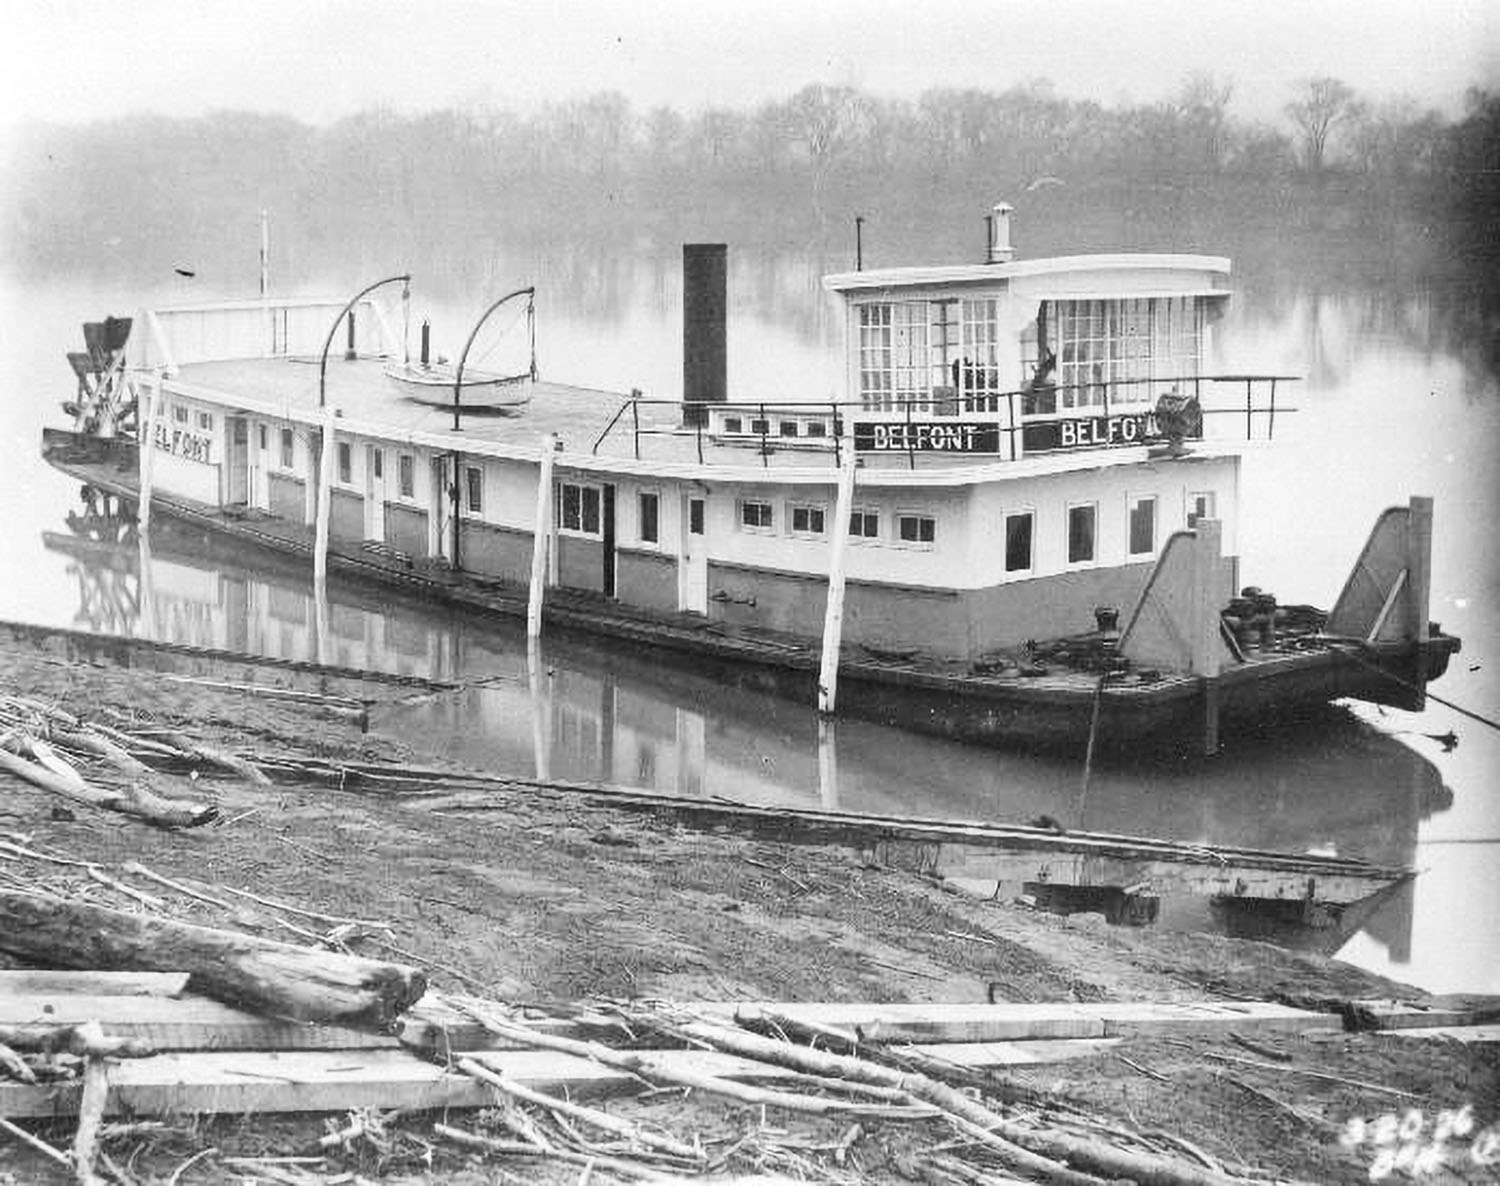 The Belfont new at Marietta Manufacturing in 1926. (Dan Owen Boat Photo Museum collection)